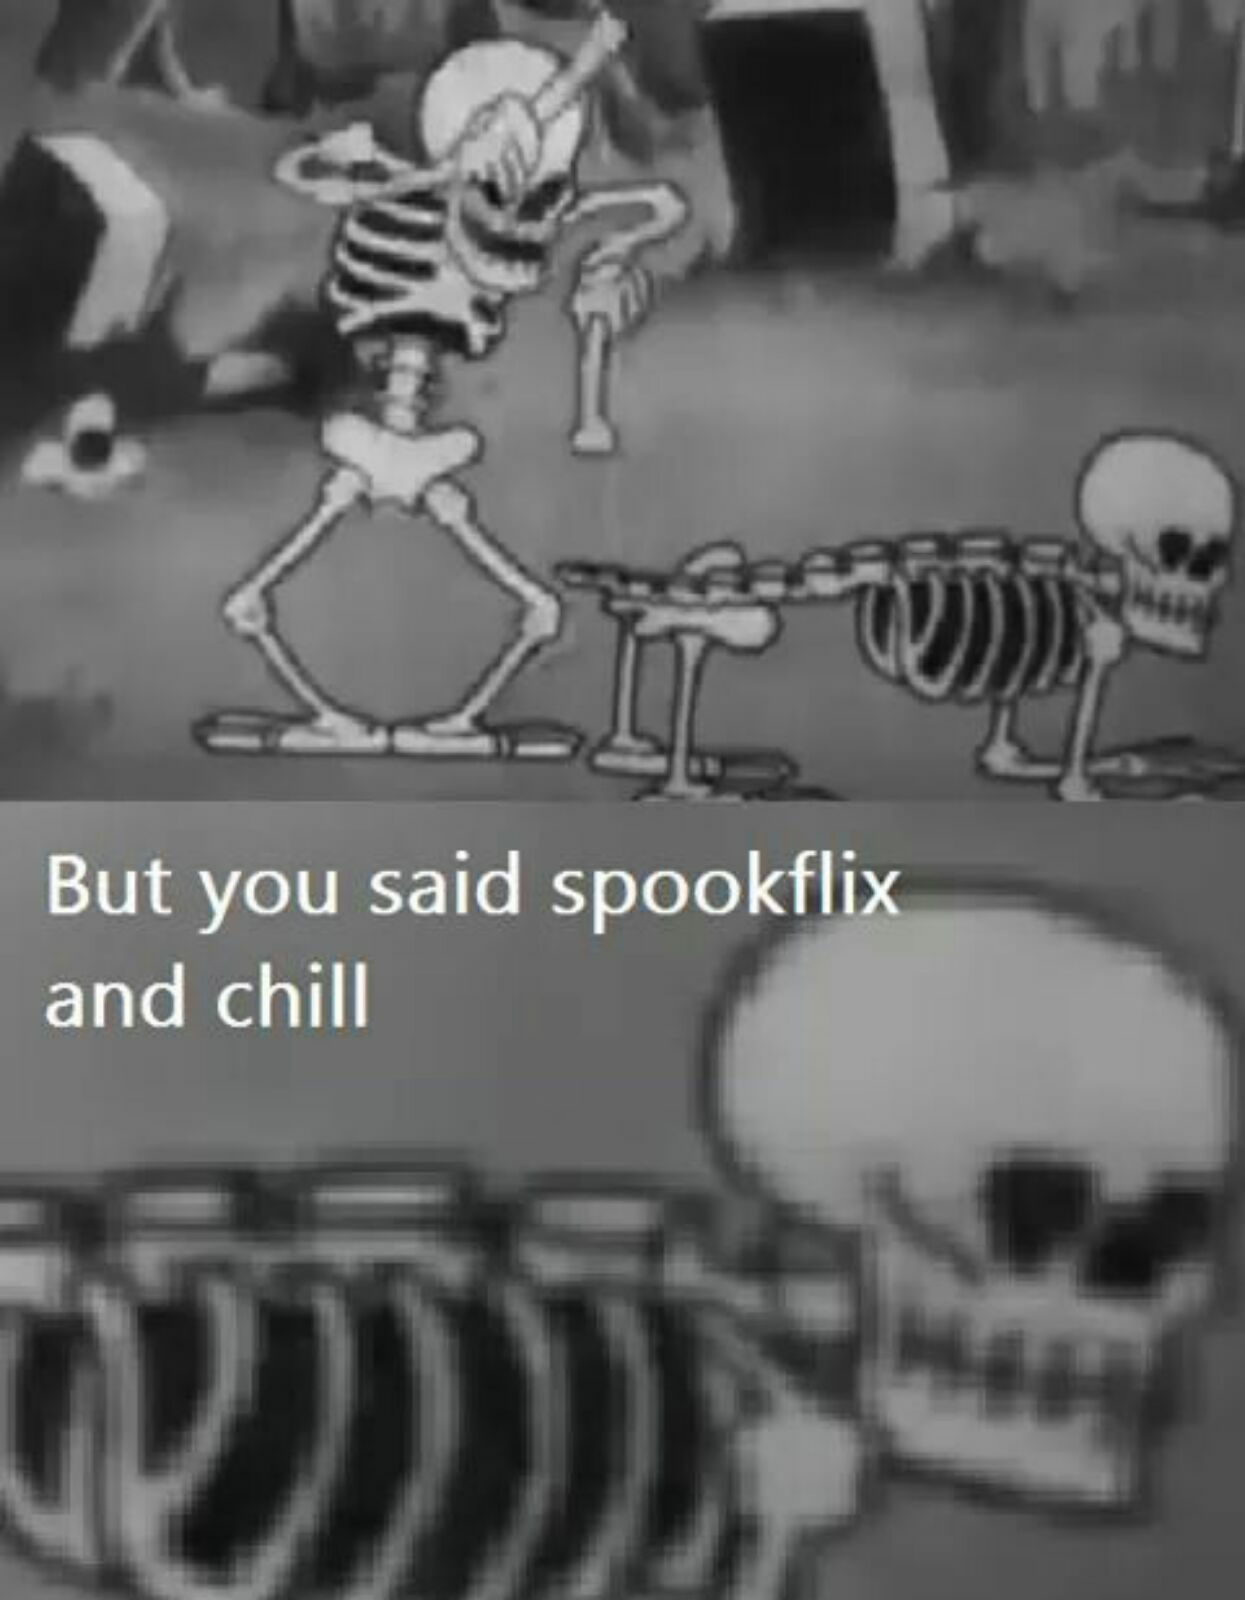 Time to get your spook on - meme